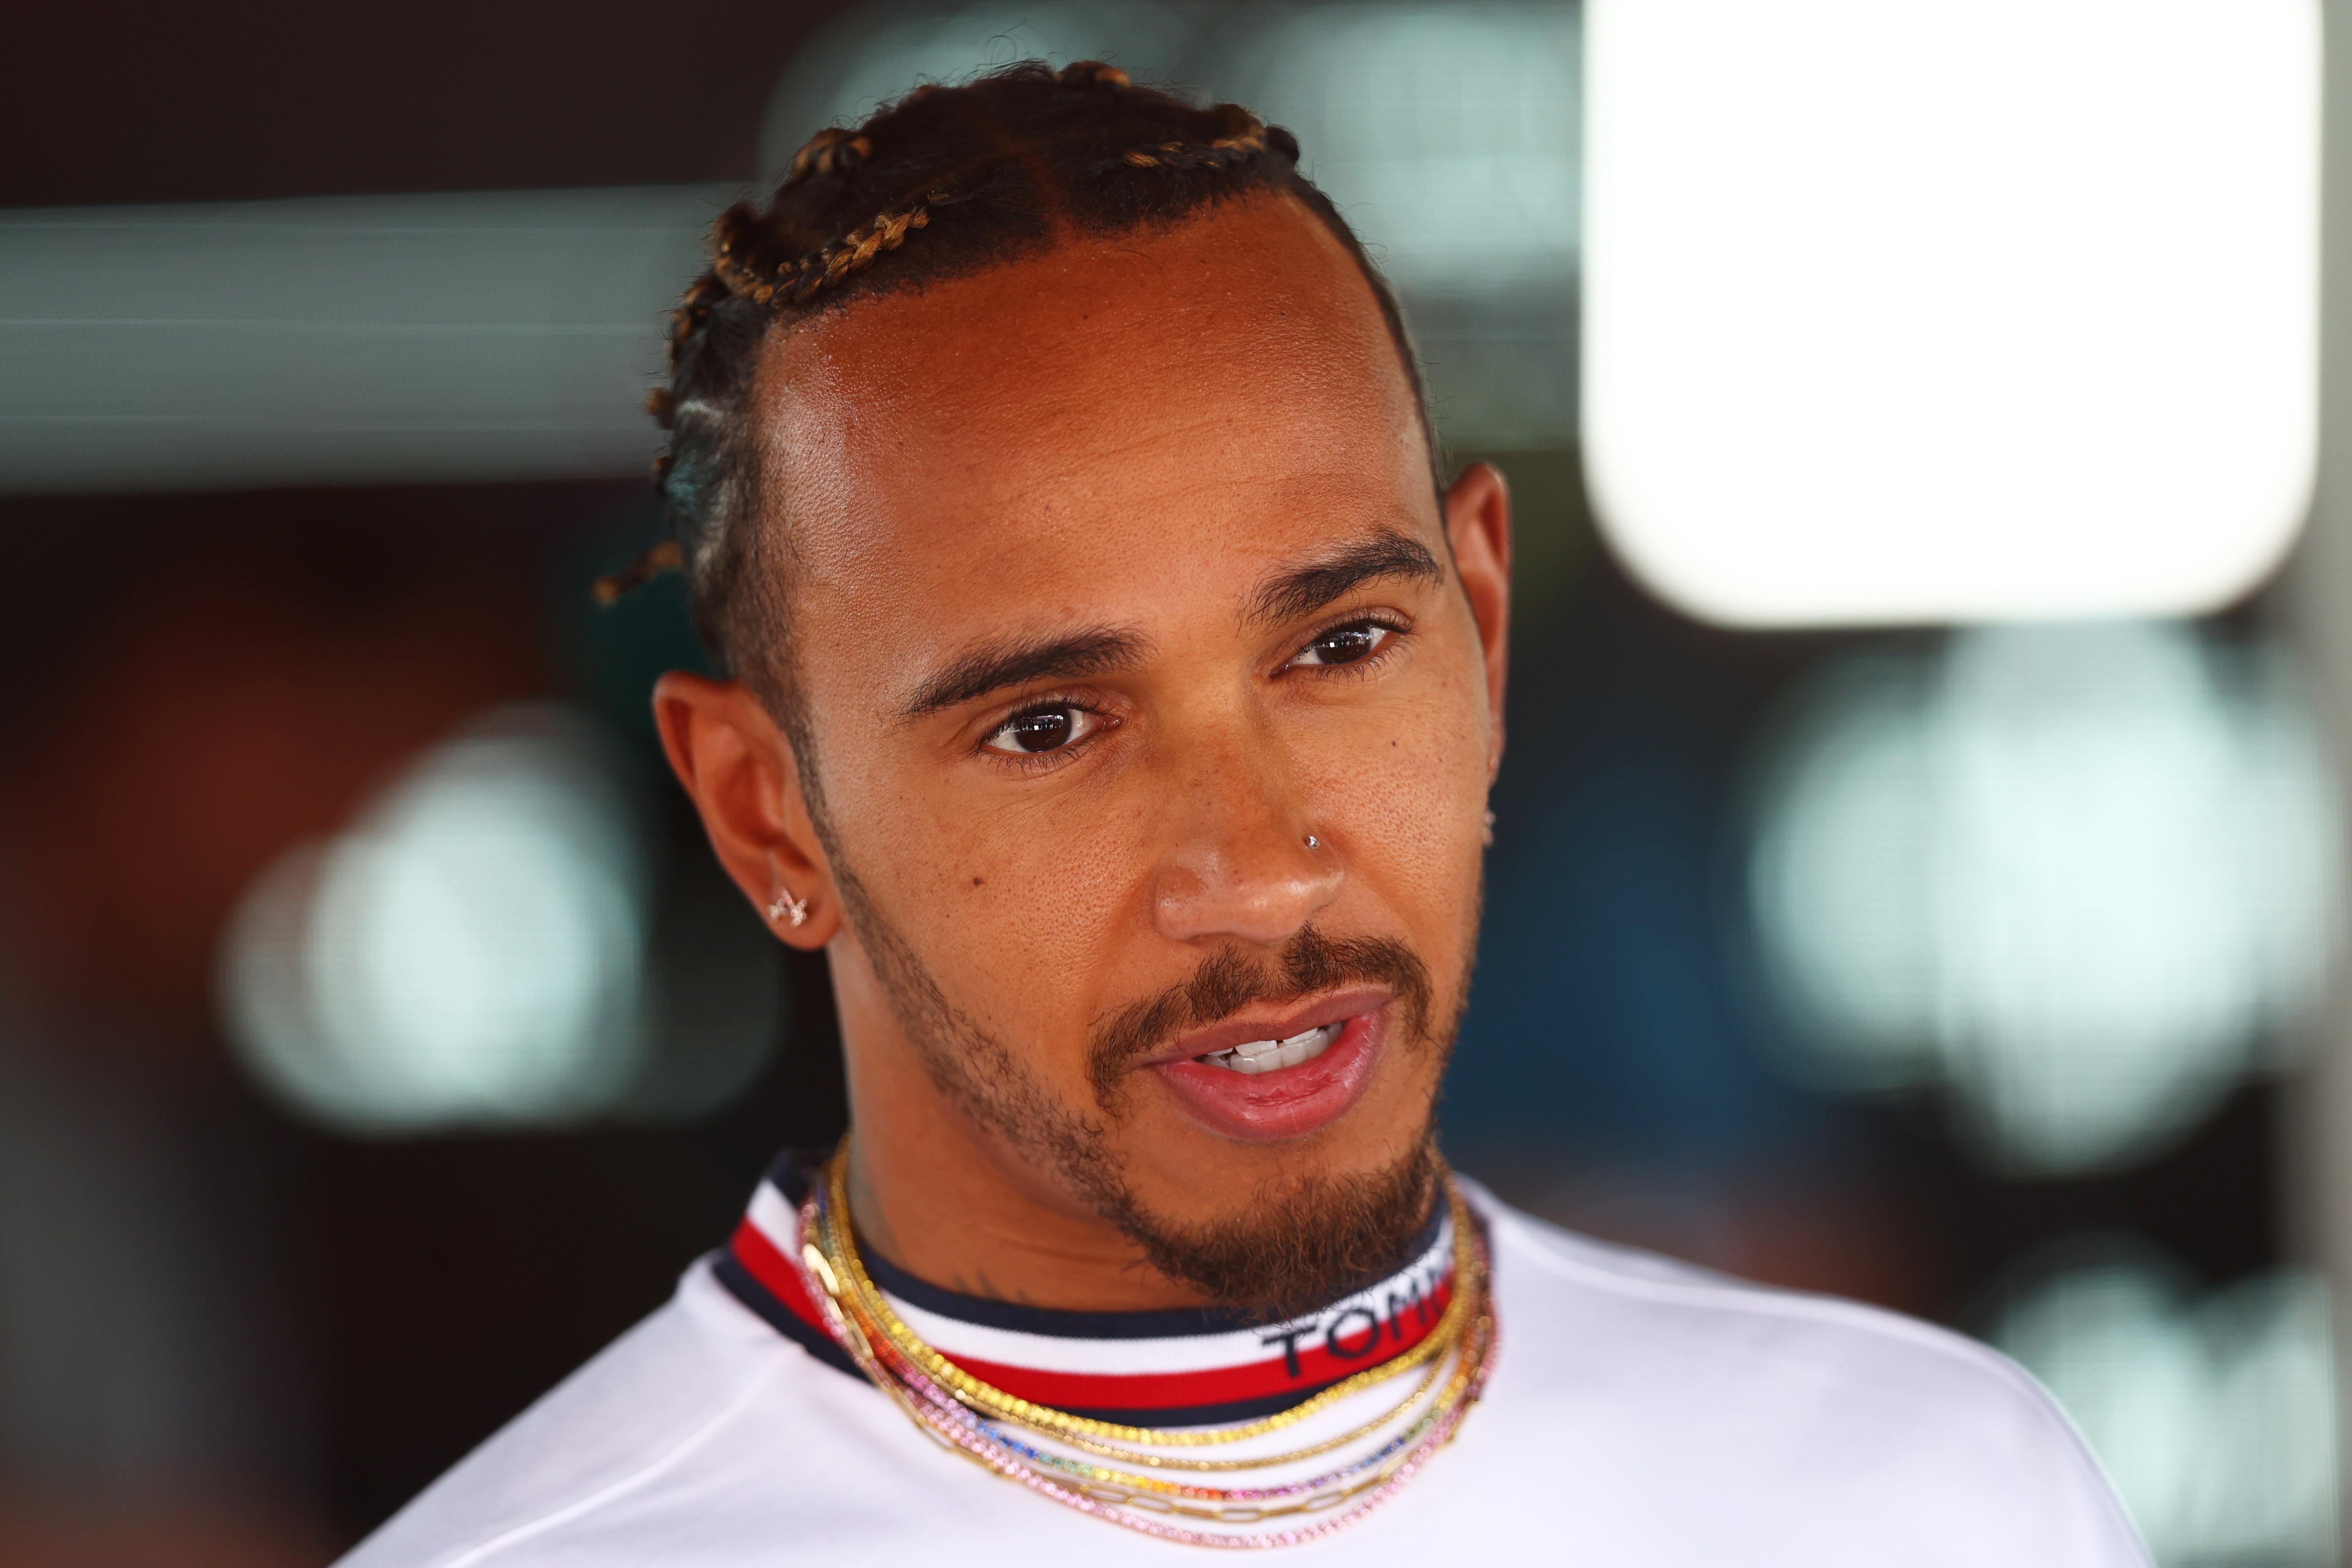 Lewis Hamilton has criticised the crackdown on jewellery wearing by drivers